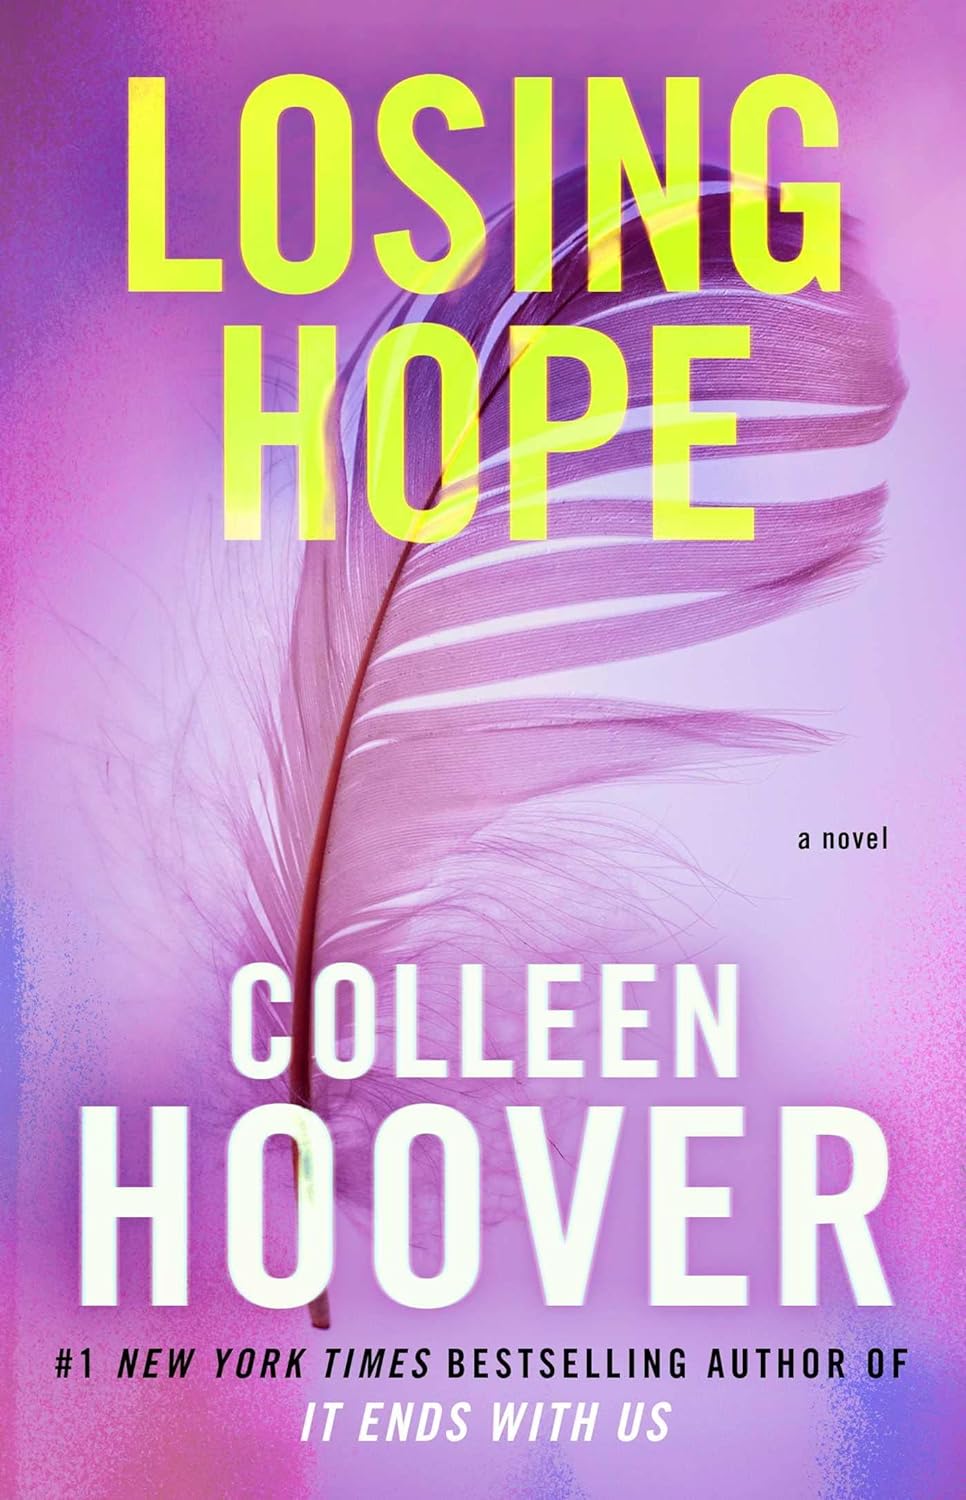 Losing Hope (Hopeless, #2) by Colleen Hoover